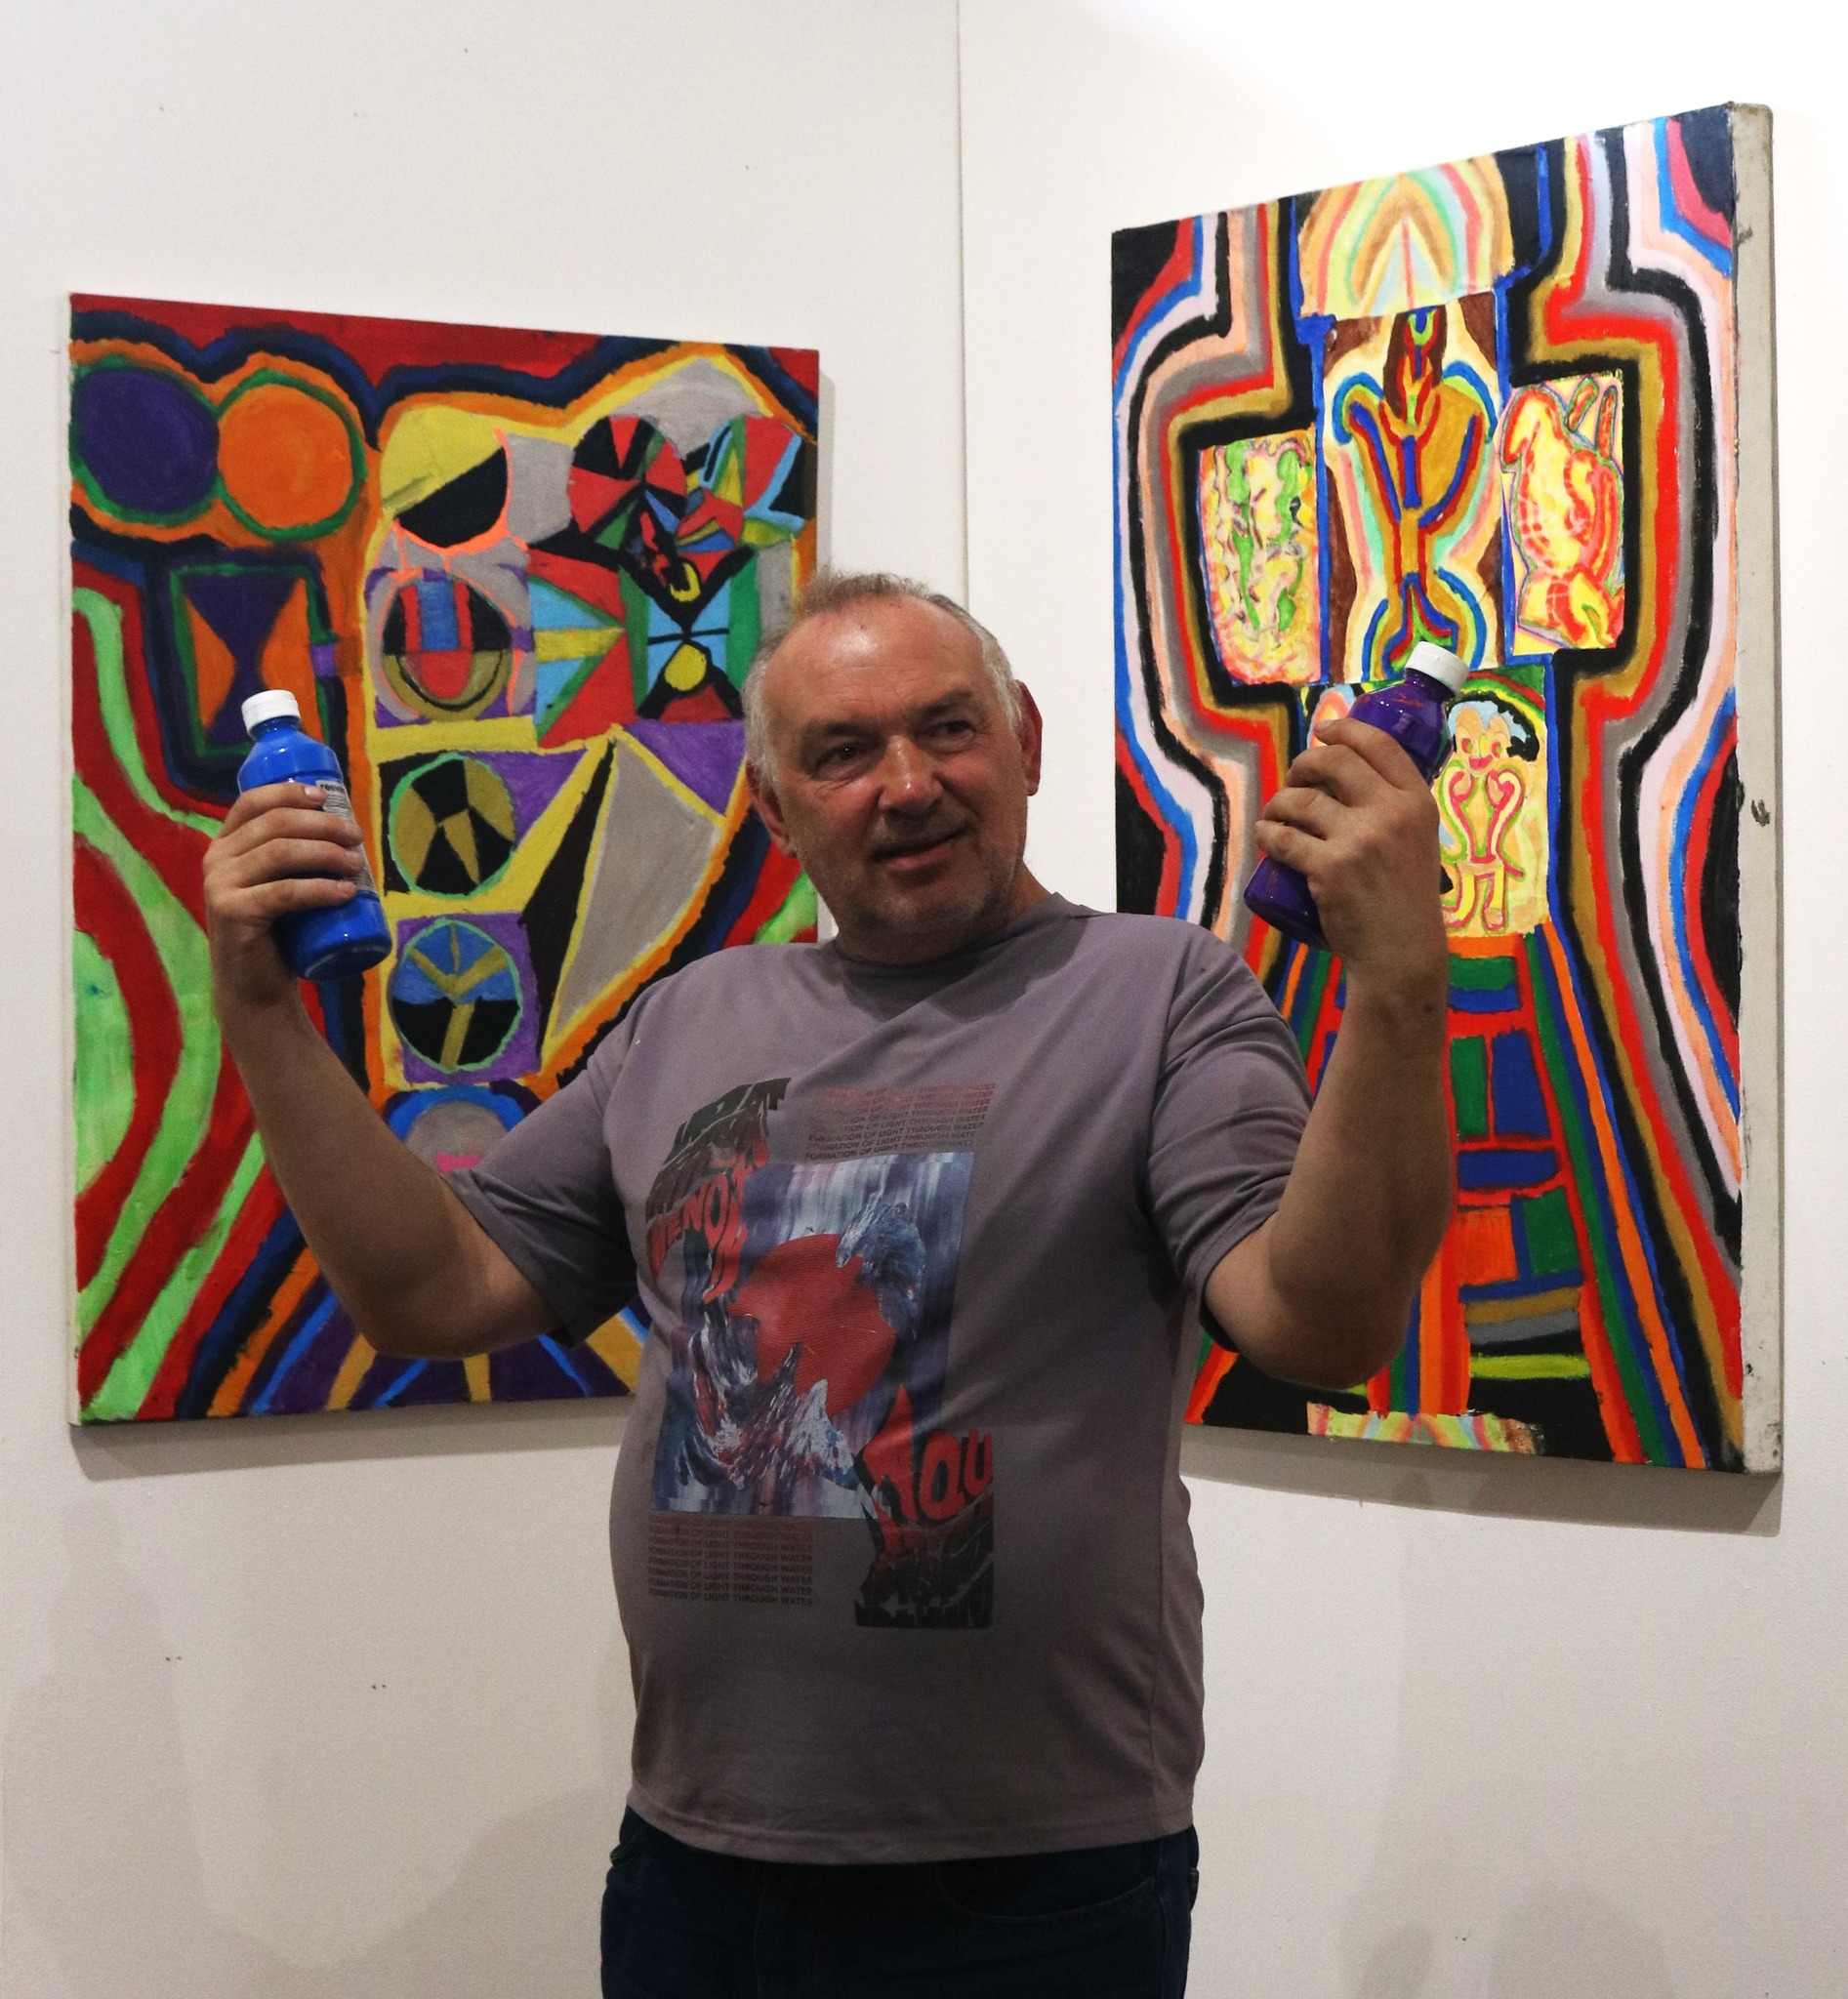 Patrick standing in front of some of his hung work